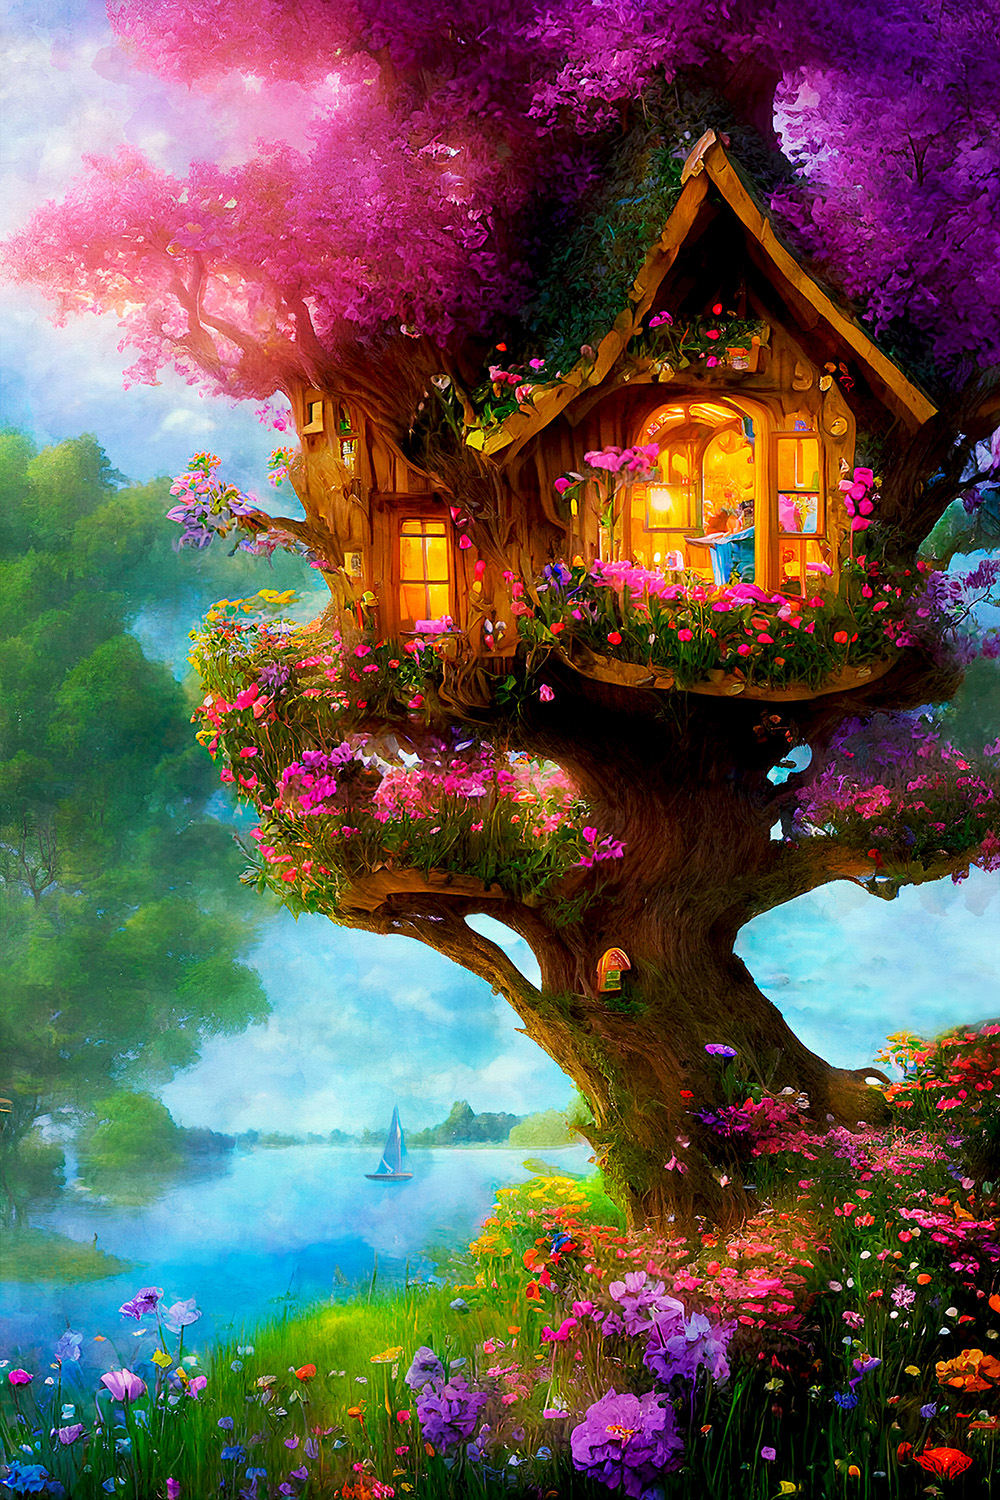 My Summer Treehouse by the Lake Fantasy Jigsaw Puzzle